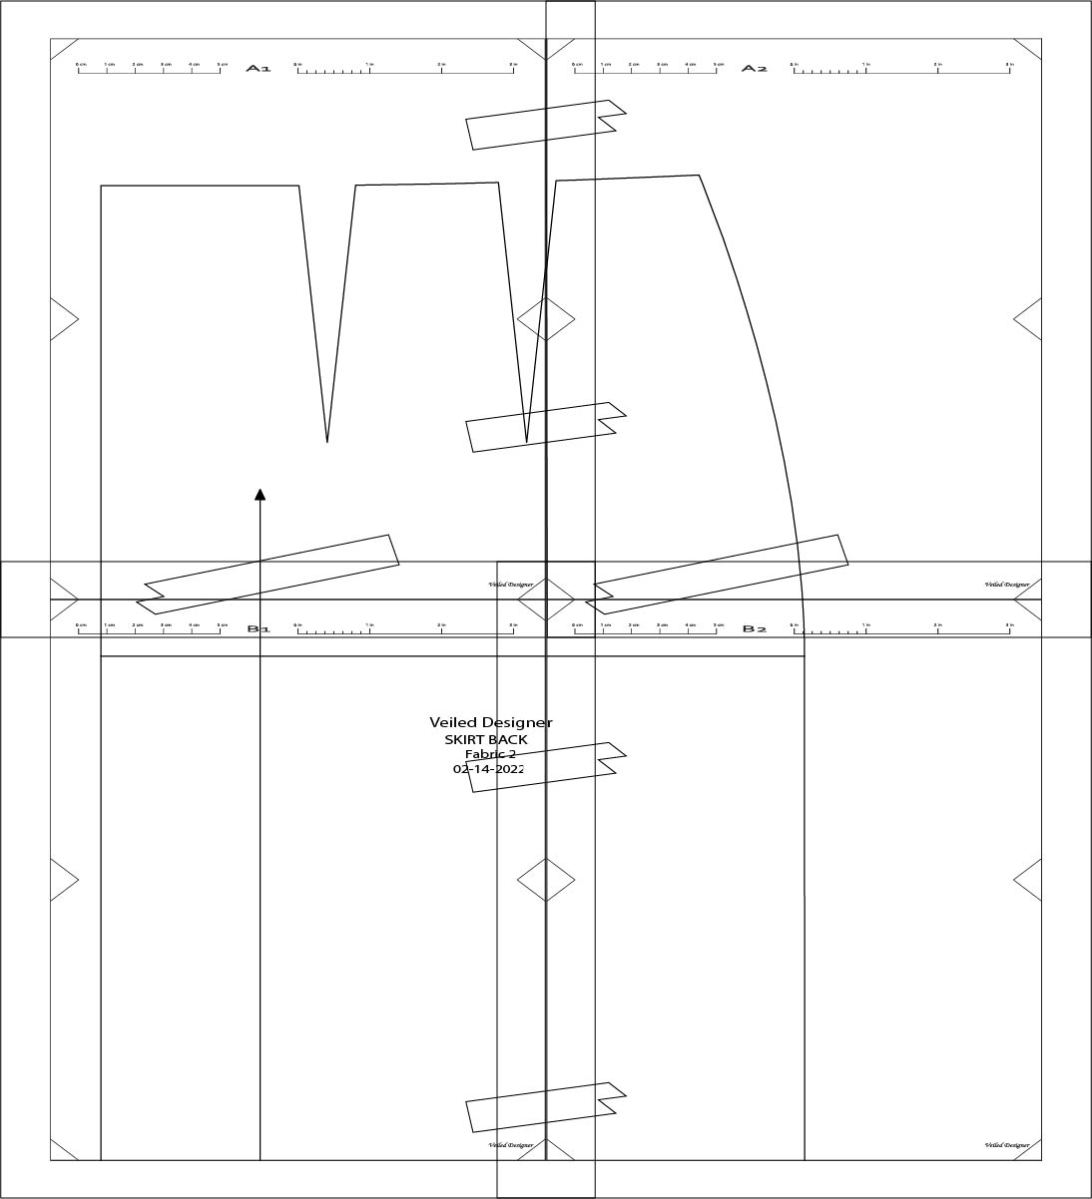 HOW TO PRINT AND ASSEMBLE PDF SEWING PATTERNS – Veiled Designer